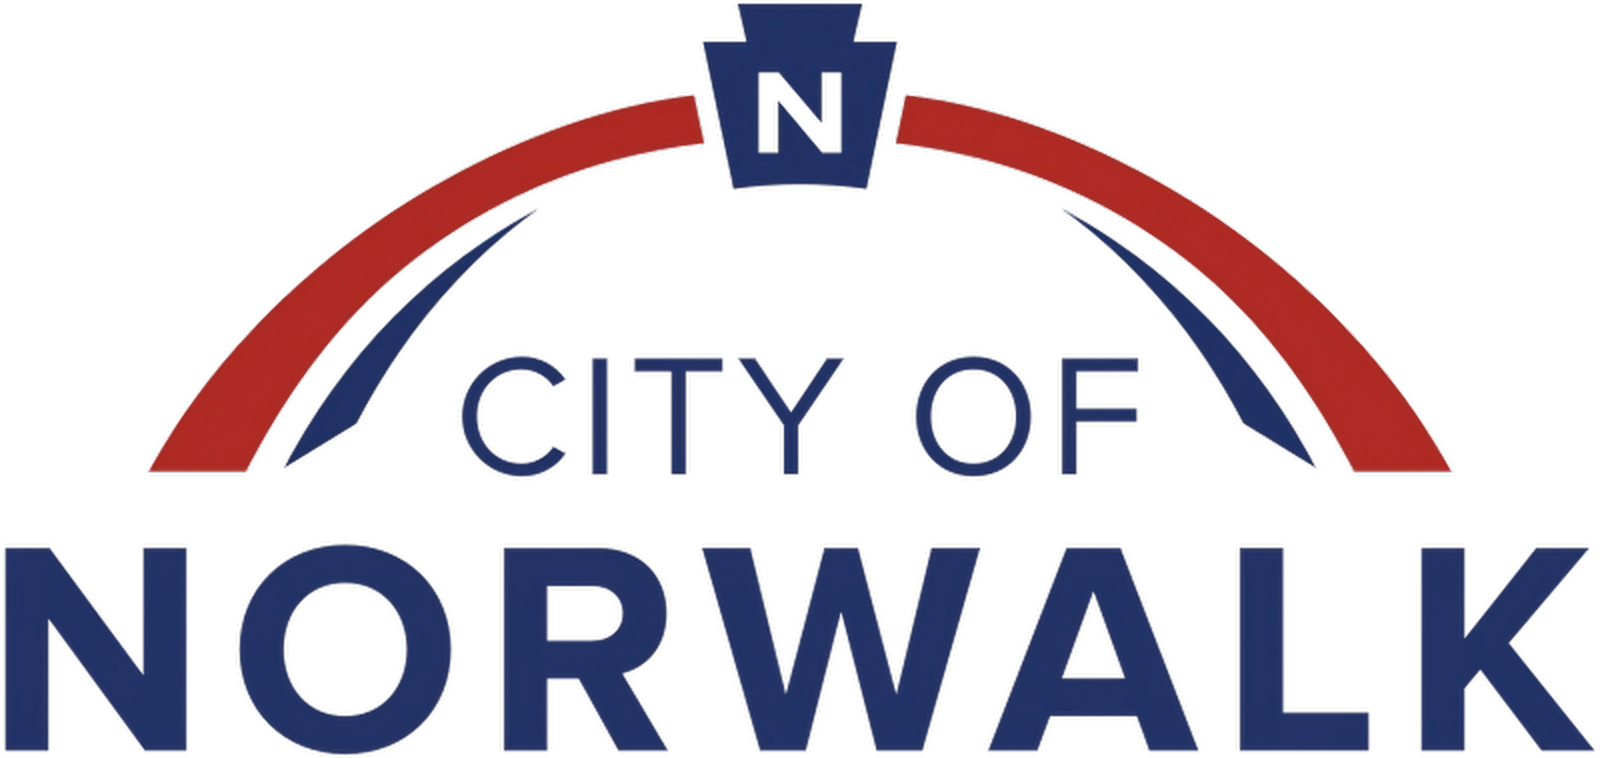 City of Norwalk, CA “Goes Live” with  EdgeSoft, Inc. ePALS™ Online Permitting and Licensing Software System